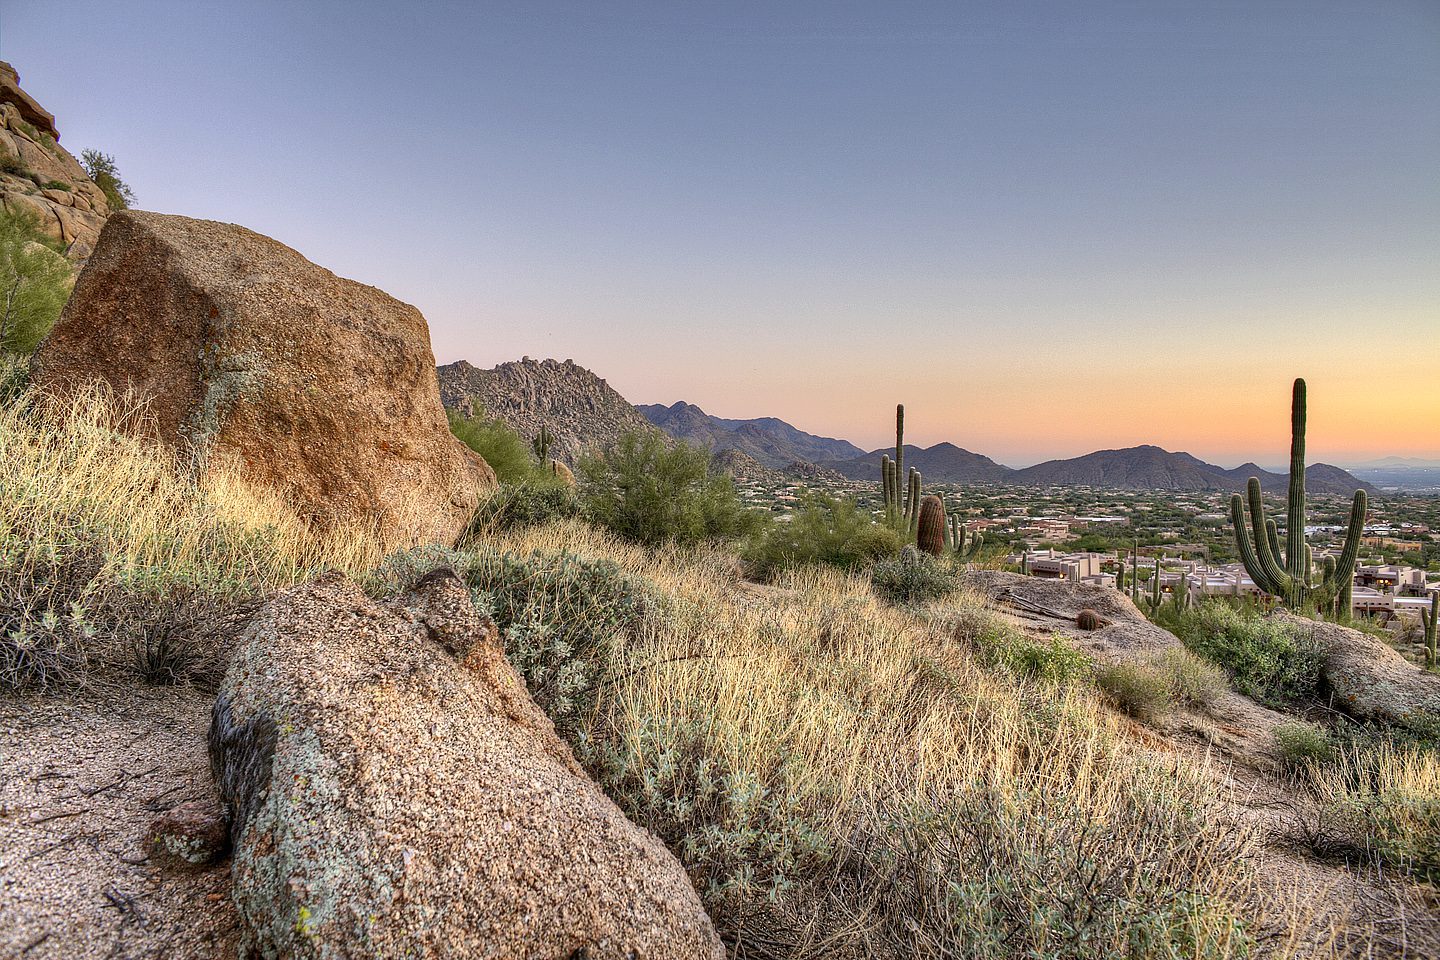 mcdowell mountains at sunset